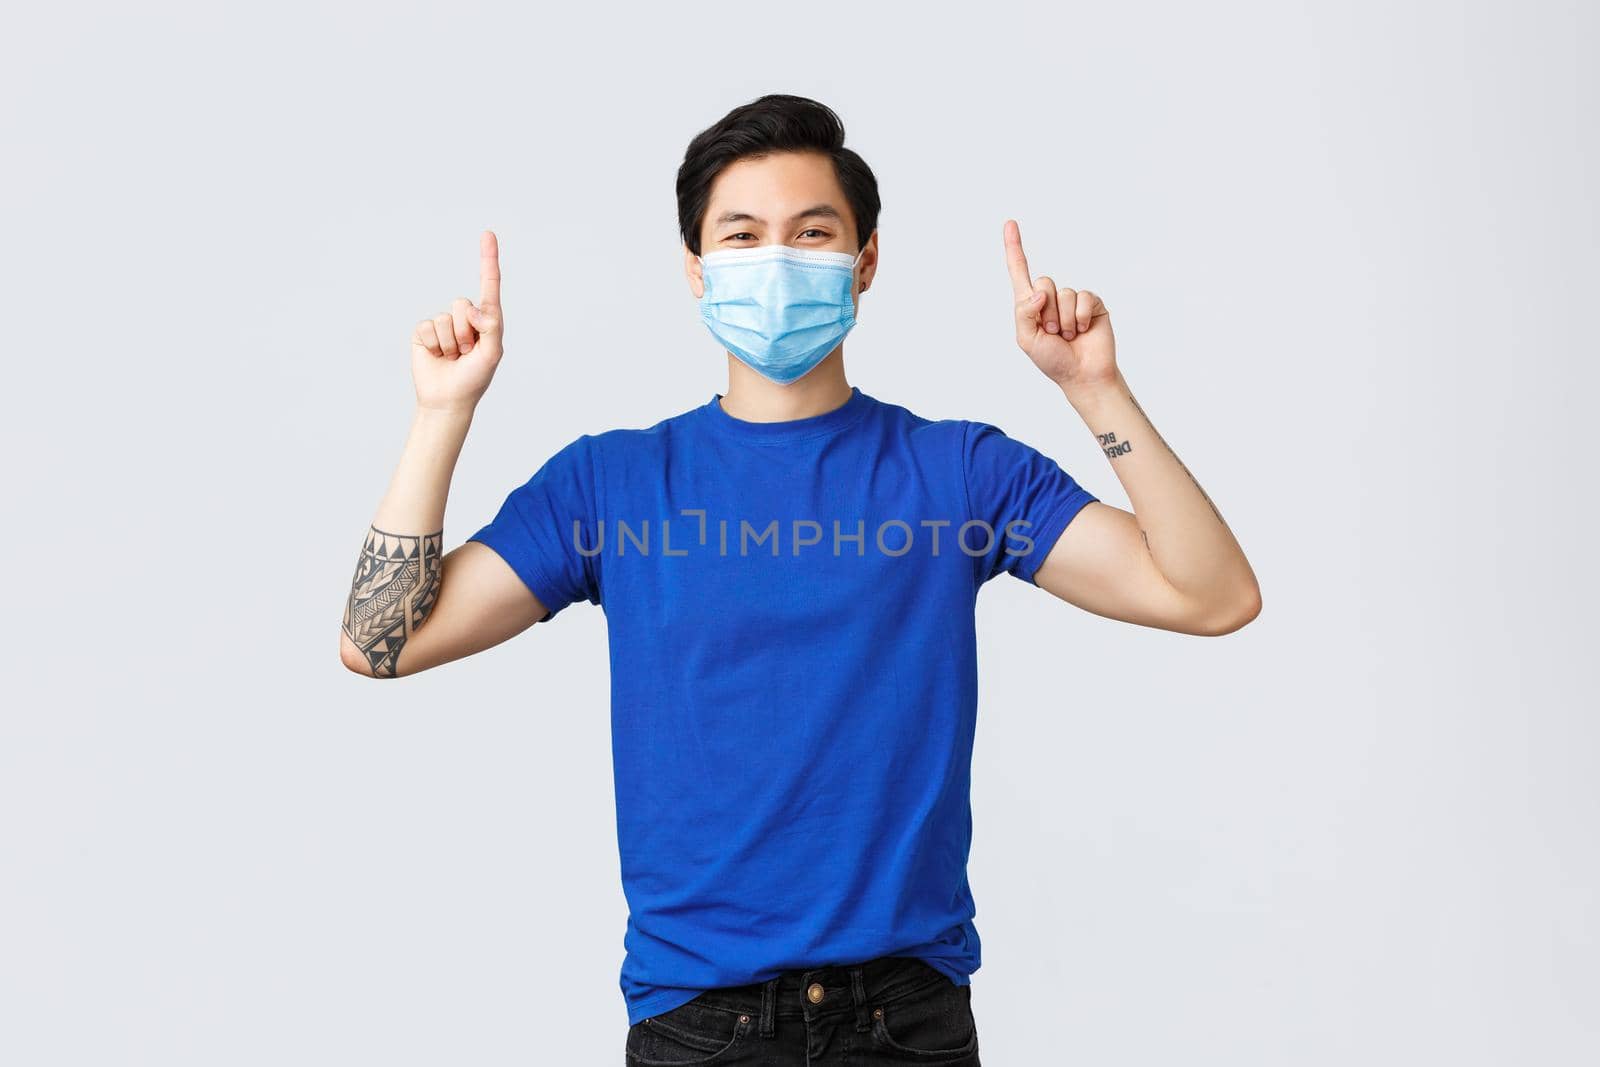 Different emotions, social distancing, self-quarantine on coronavirus and lifestyle concept. Cheerful smiling asian man in medical mask and t-shirt, pointing fingers up to advertise, showing banner.